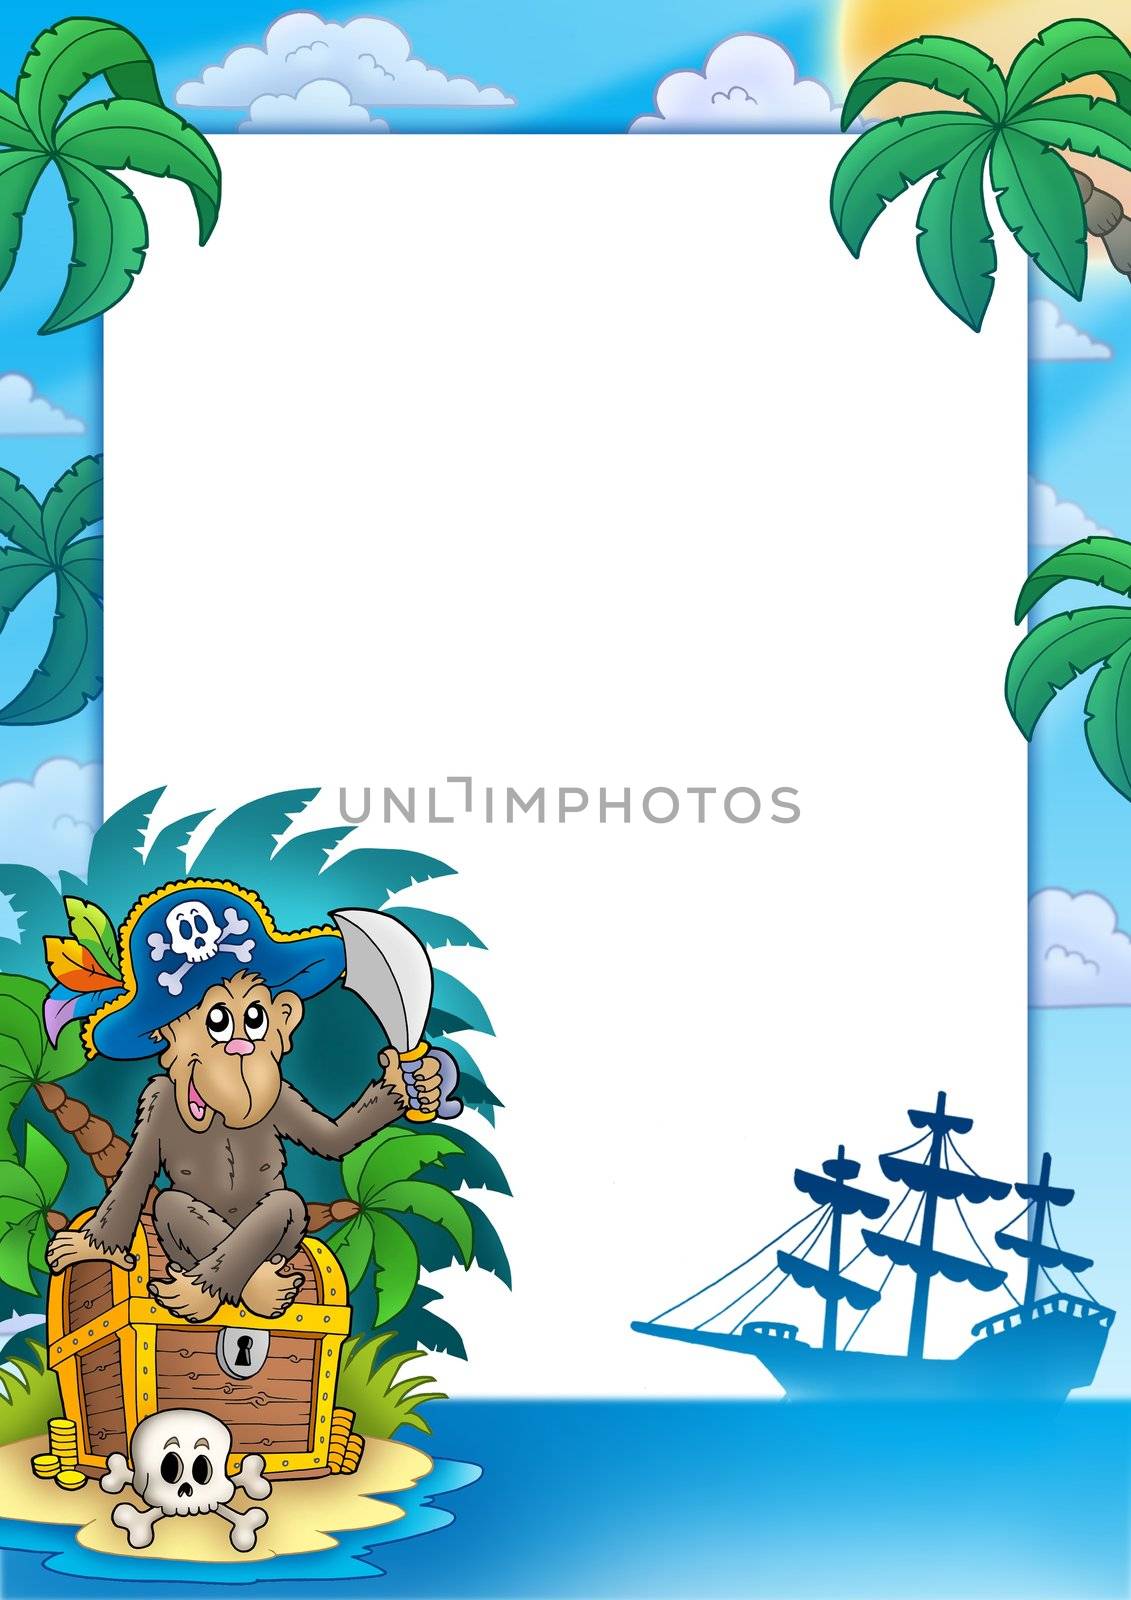 Pirate frame with monkey - color illustration.